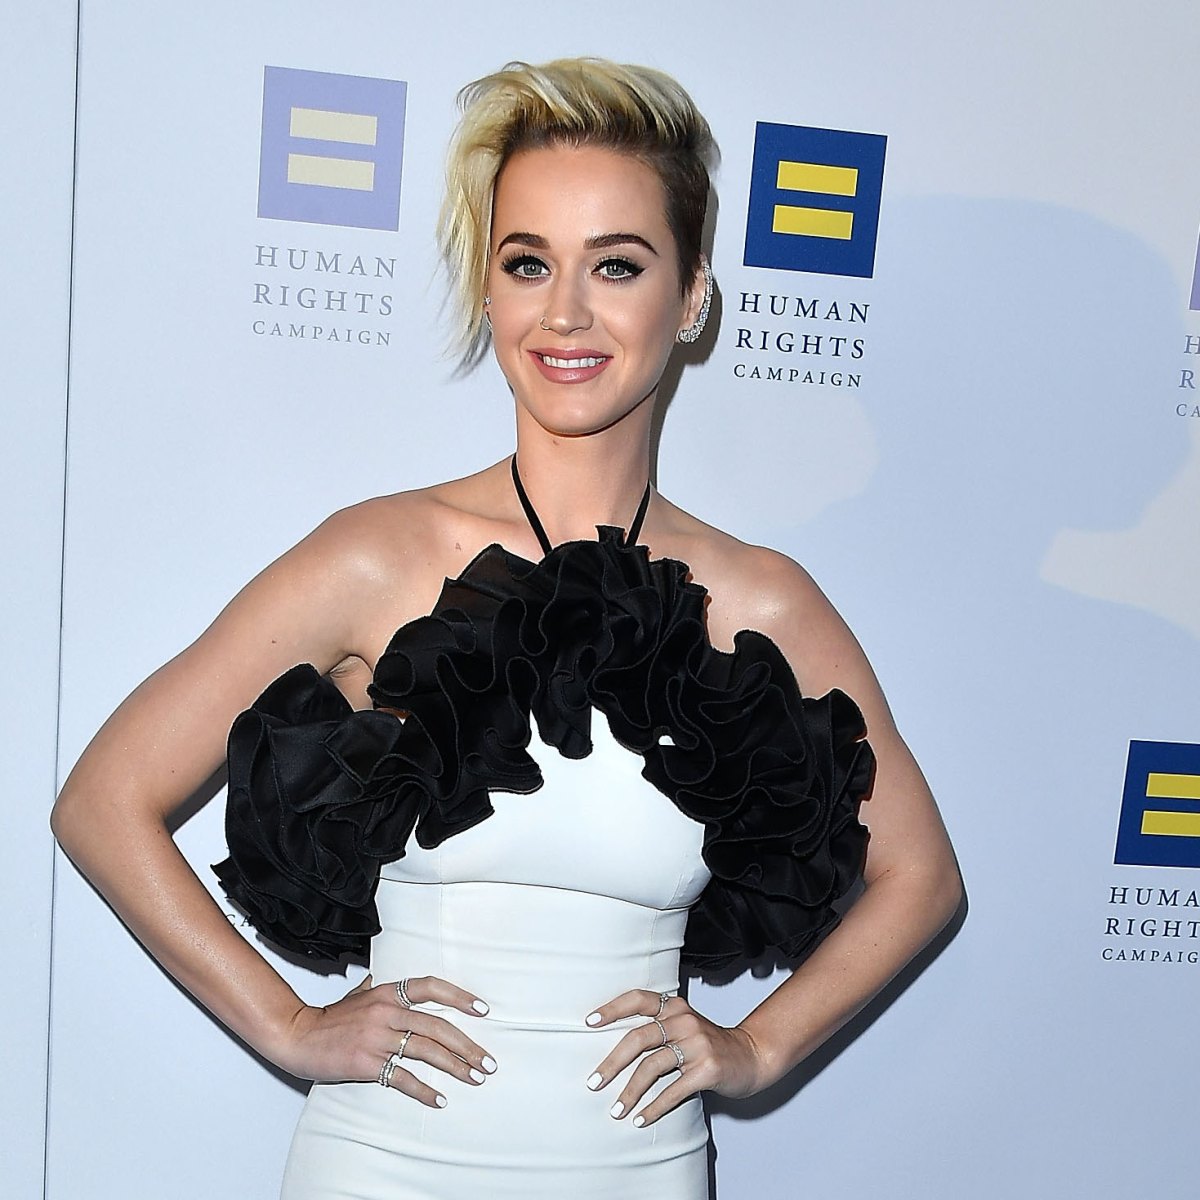 Bi Threesome Katy Perry - Katy Perry Makes a Confession About Her Sexuality While Discussing \